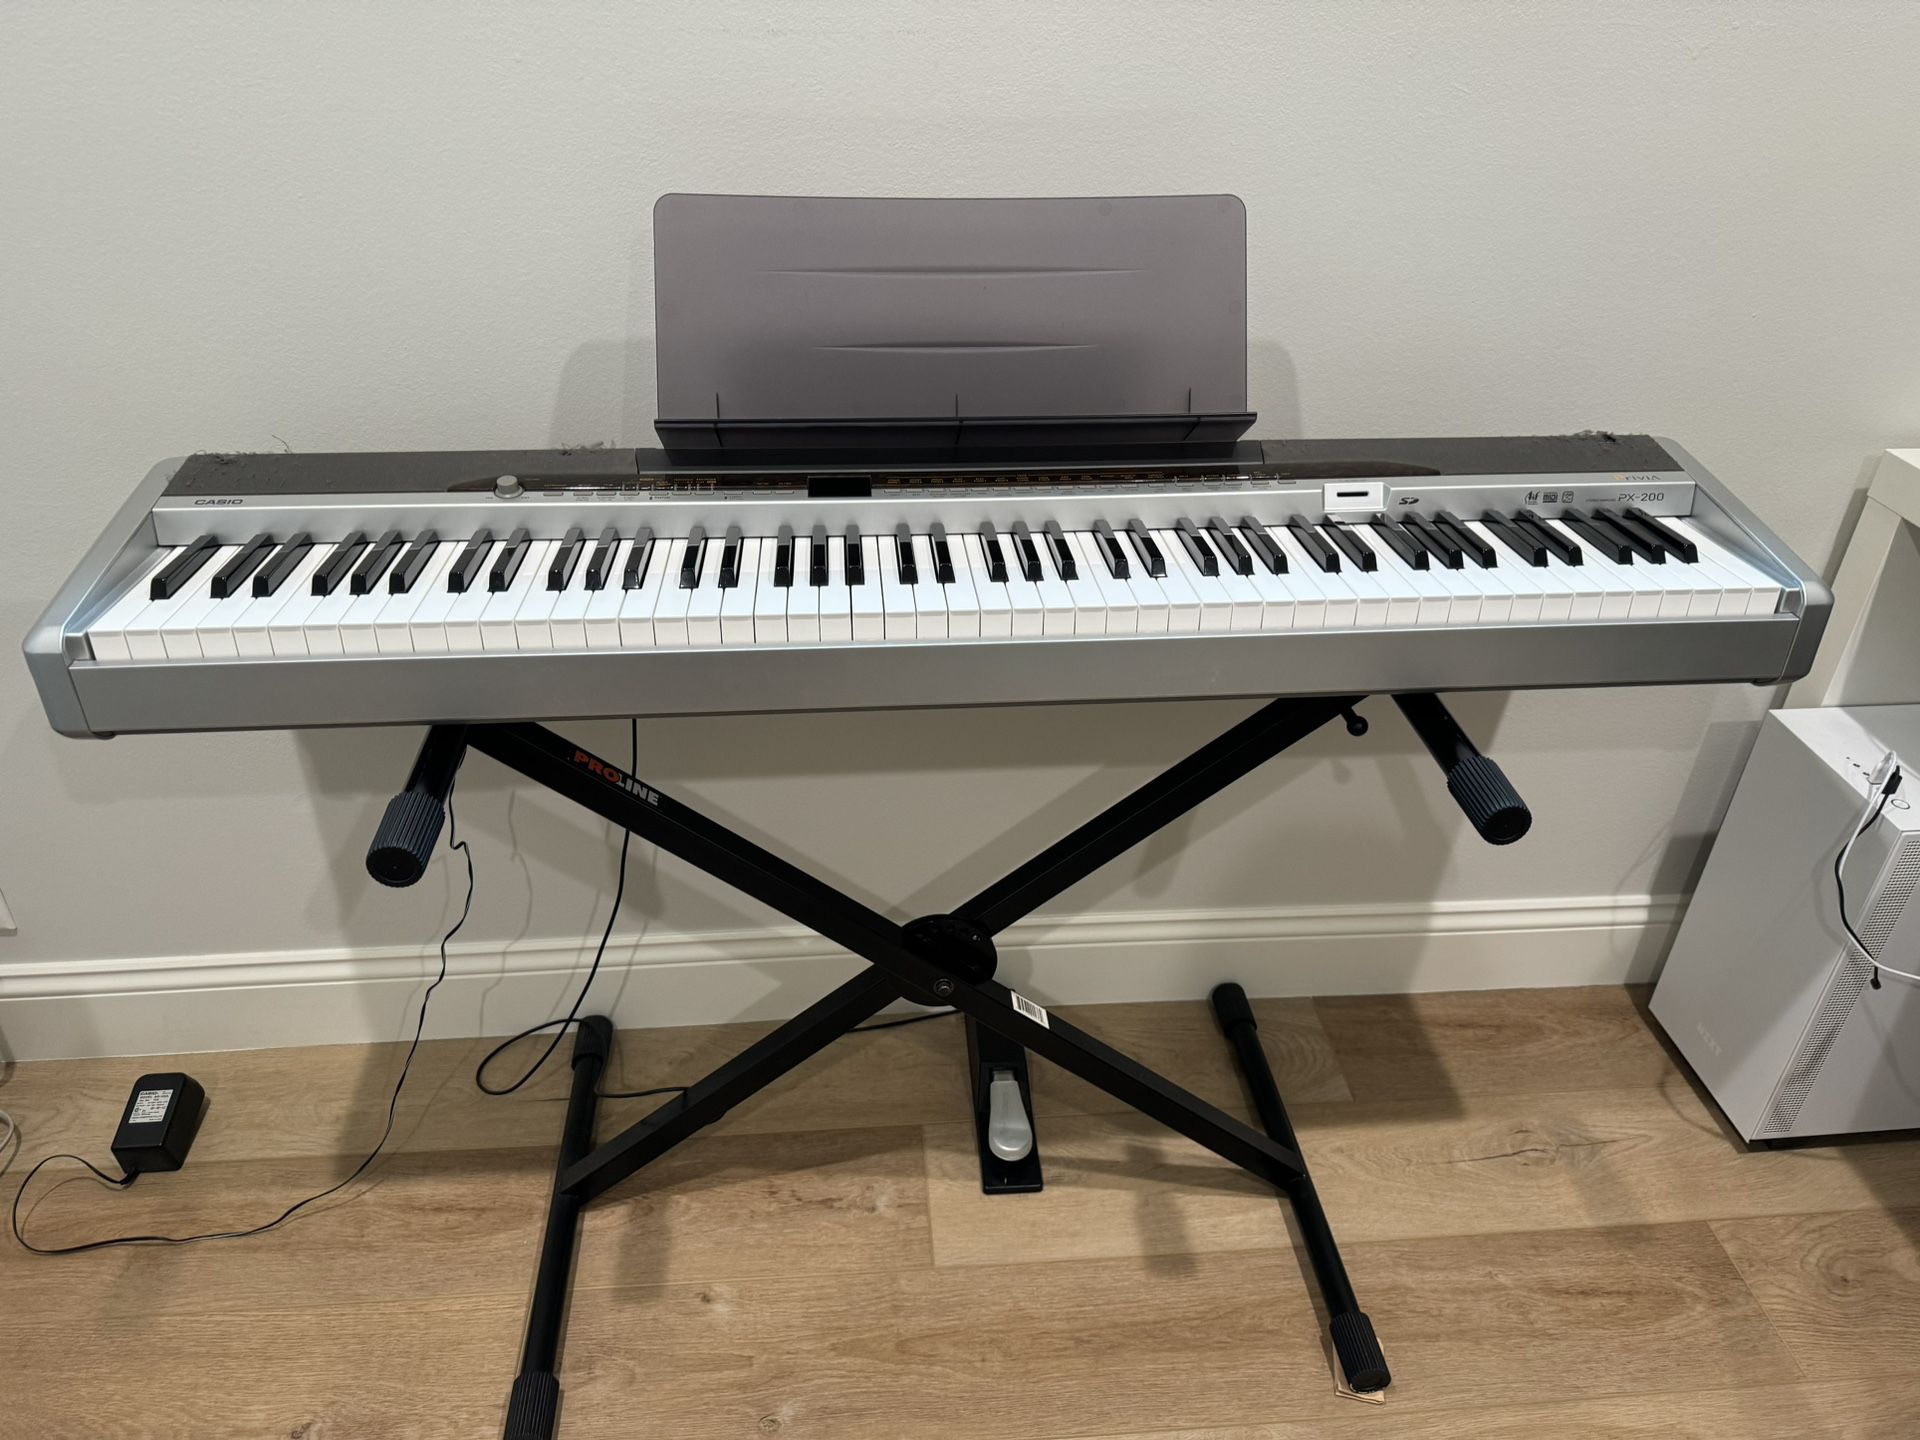 Casio 88 key digital piano, Privia PX-200 with Proline Stand and Damper Pedal Included